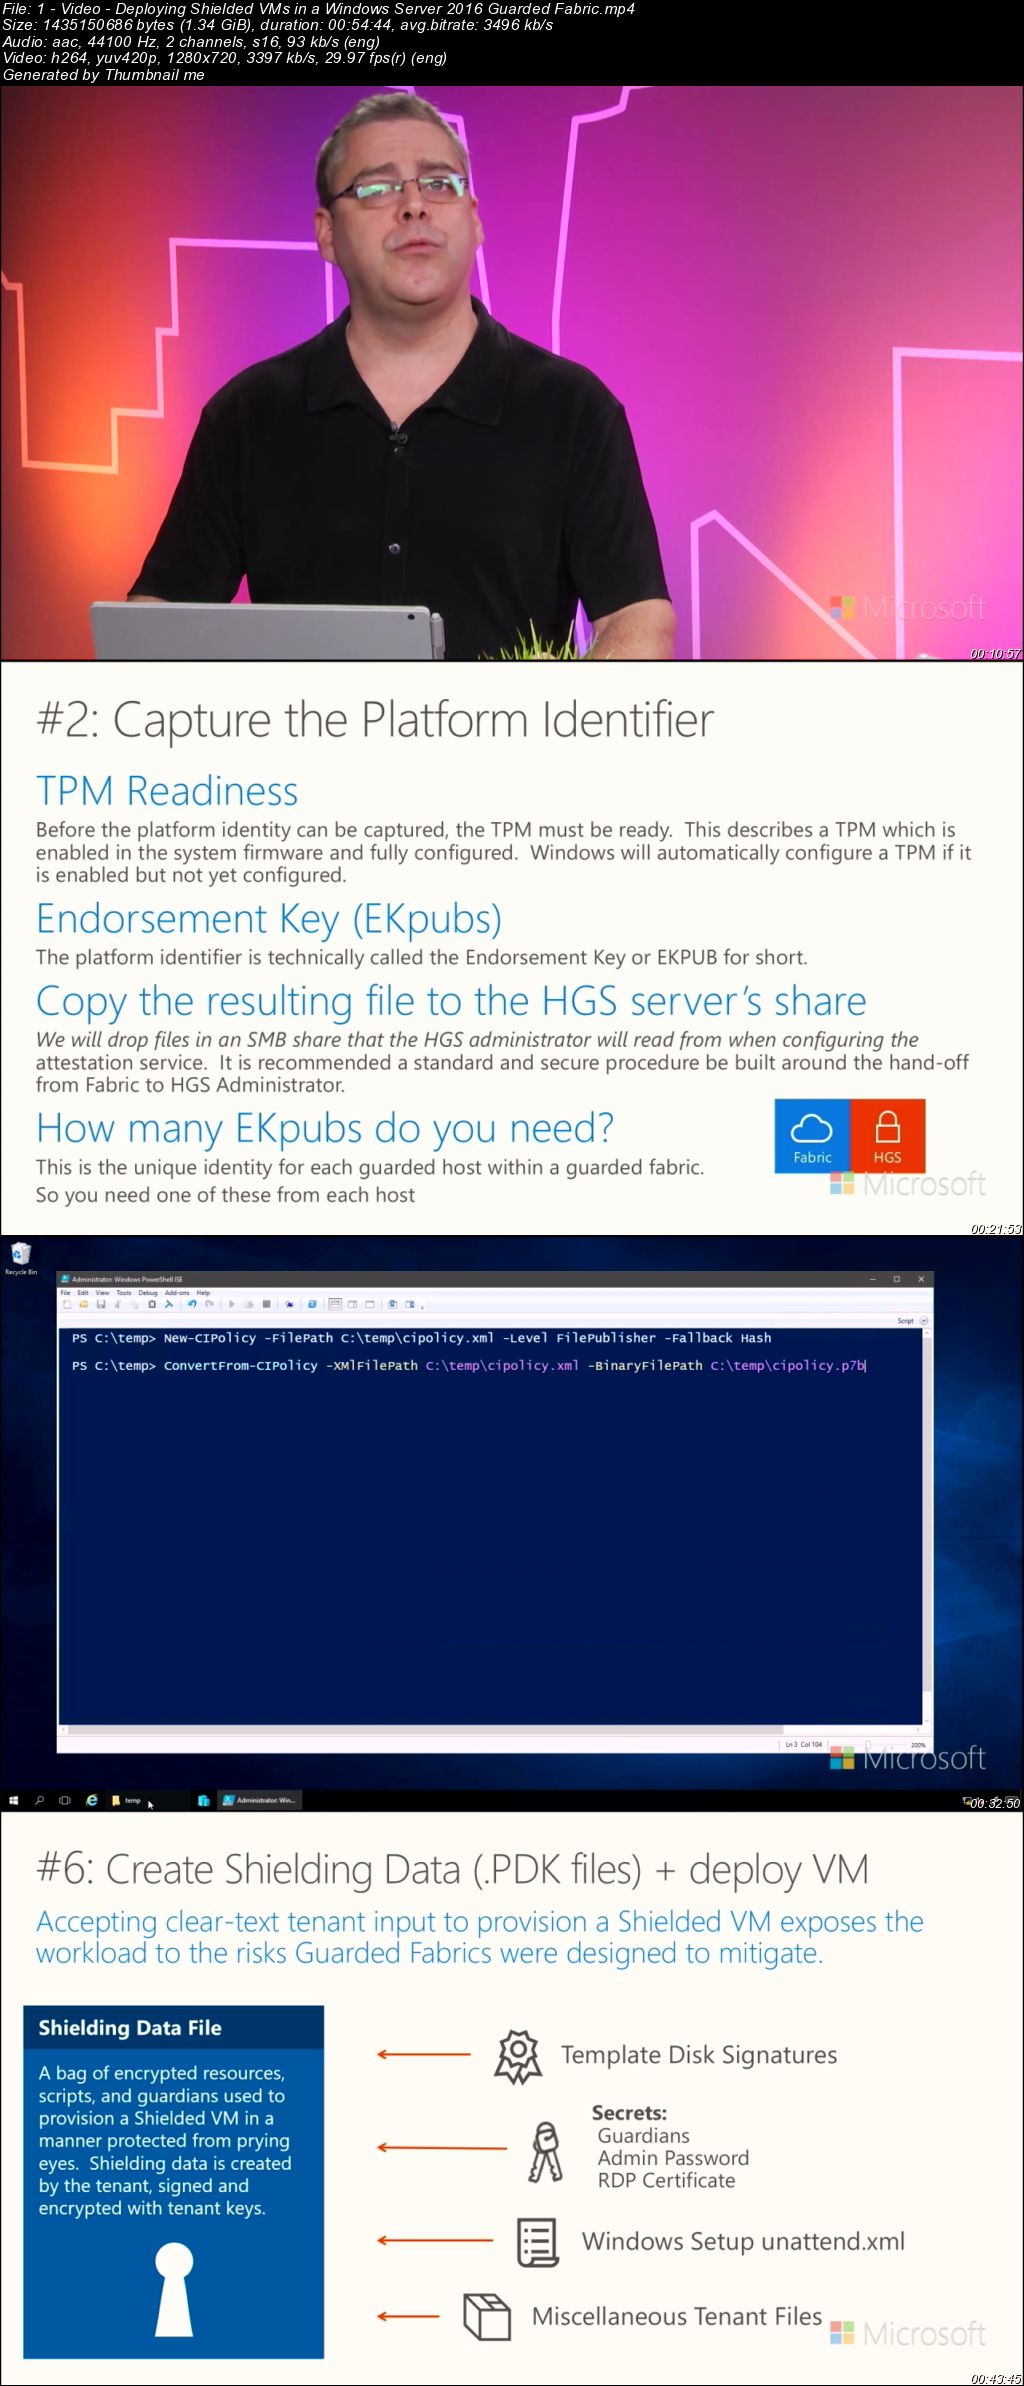 Deploying Shielded VMs and a Guarded Fabric with Windows Server 2016